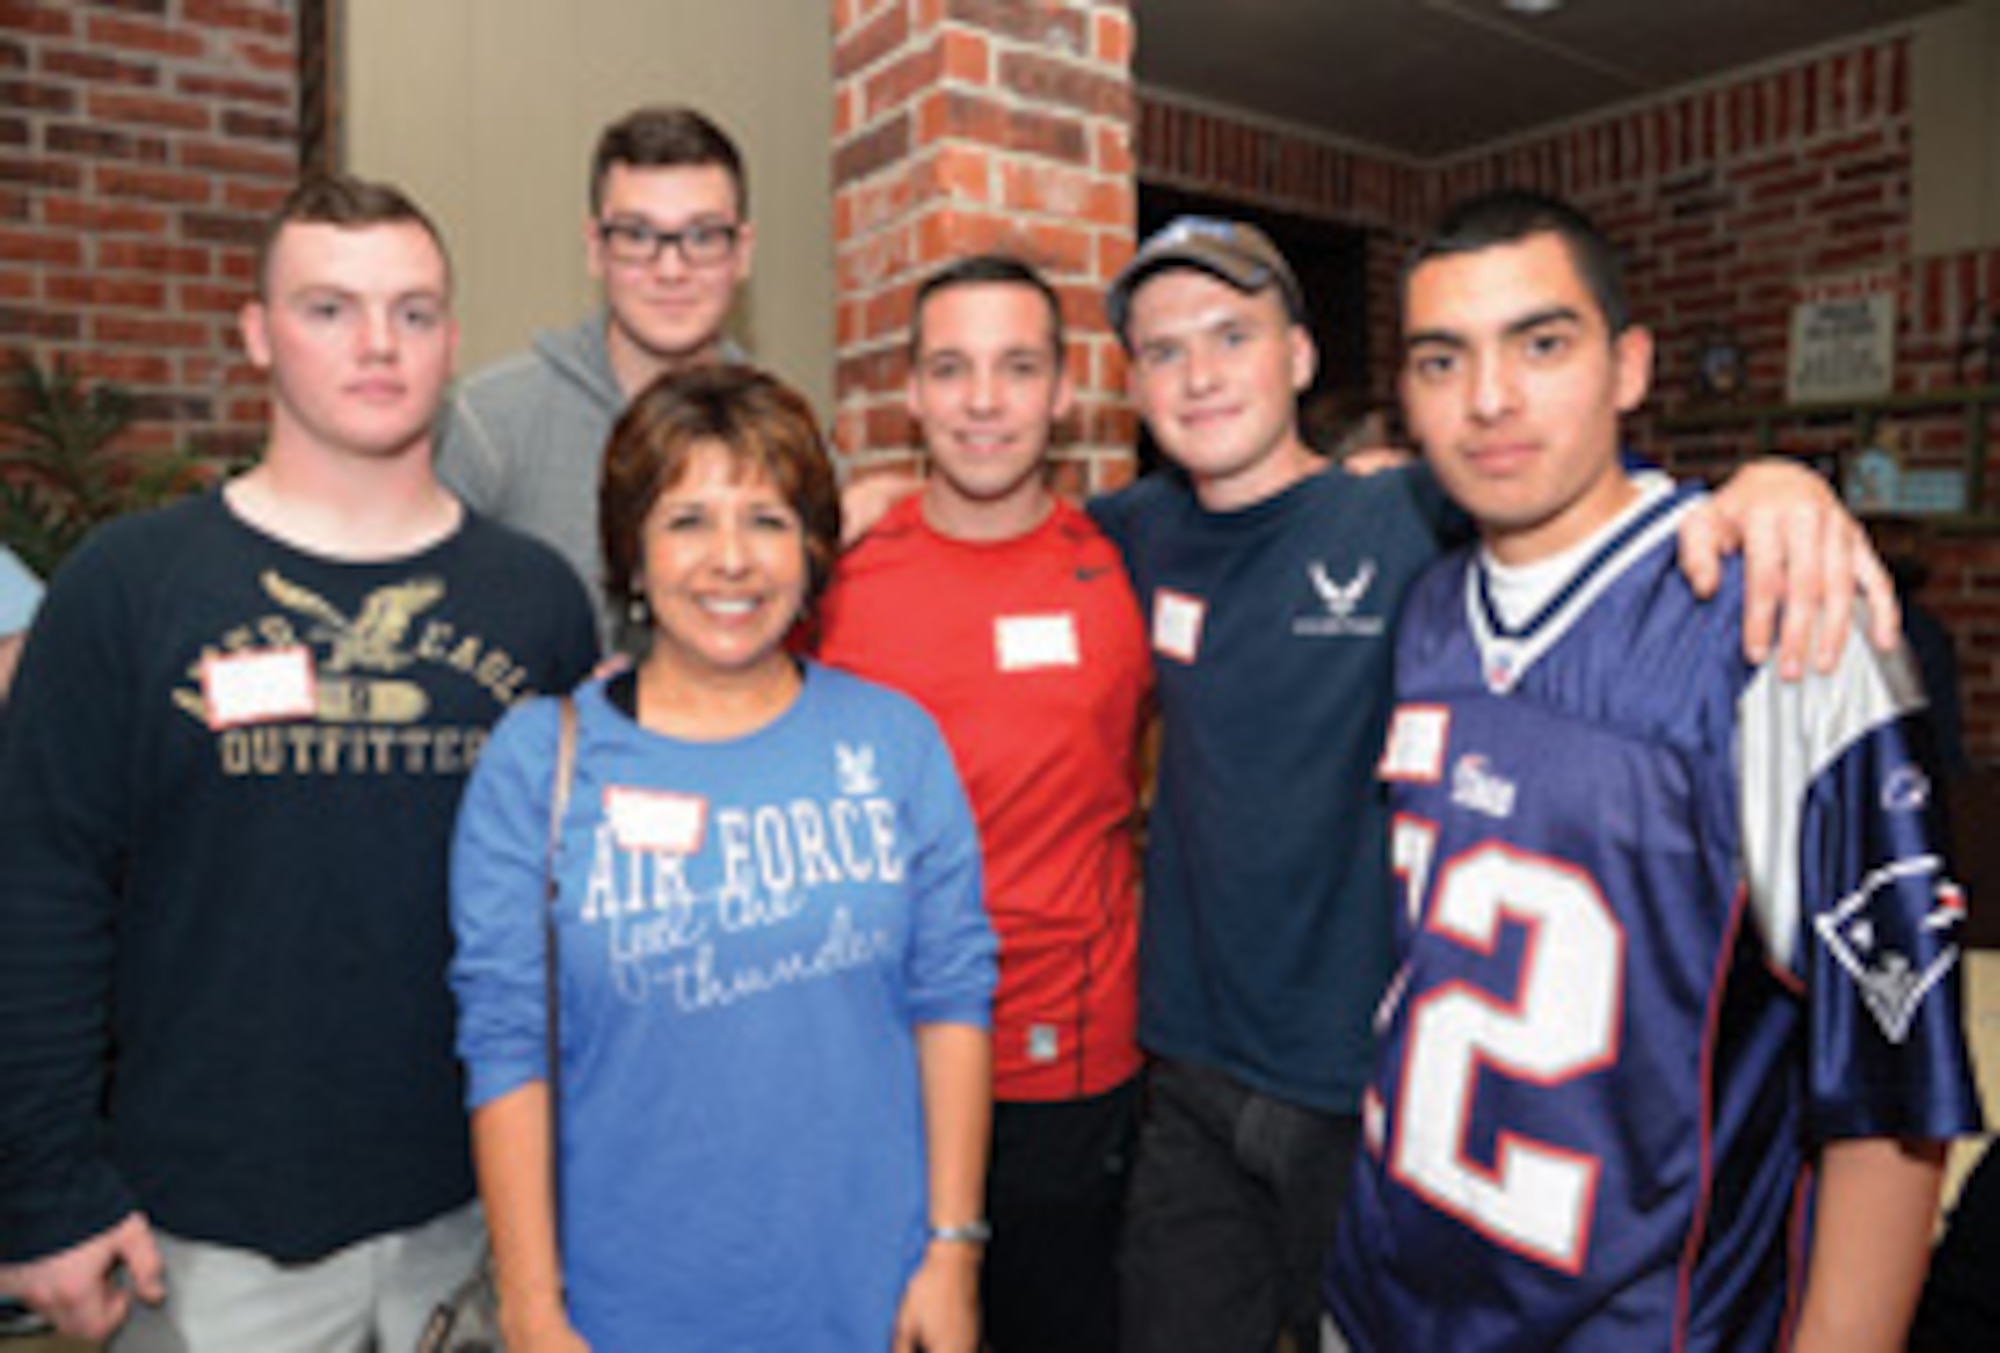 Maria Baker, a host mother with the Home Away From Home program, poses for a picture at a recent picnic for the program with her “adopted” Airmen, left to right, Amn. Basic Nolan Switanowski, Amn. First Class Braden McGee, Amn. First Class Benjamin Pohl, Amn. First Class Kyle Long and Amn. First Class Jacob Lozano. All Airmen are with the 552nd Air Control Wing. Air force photo by Kelly White/Released